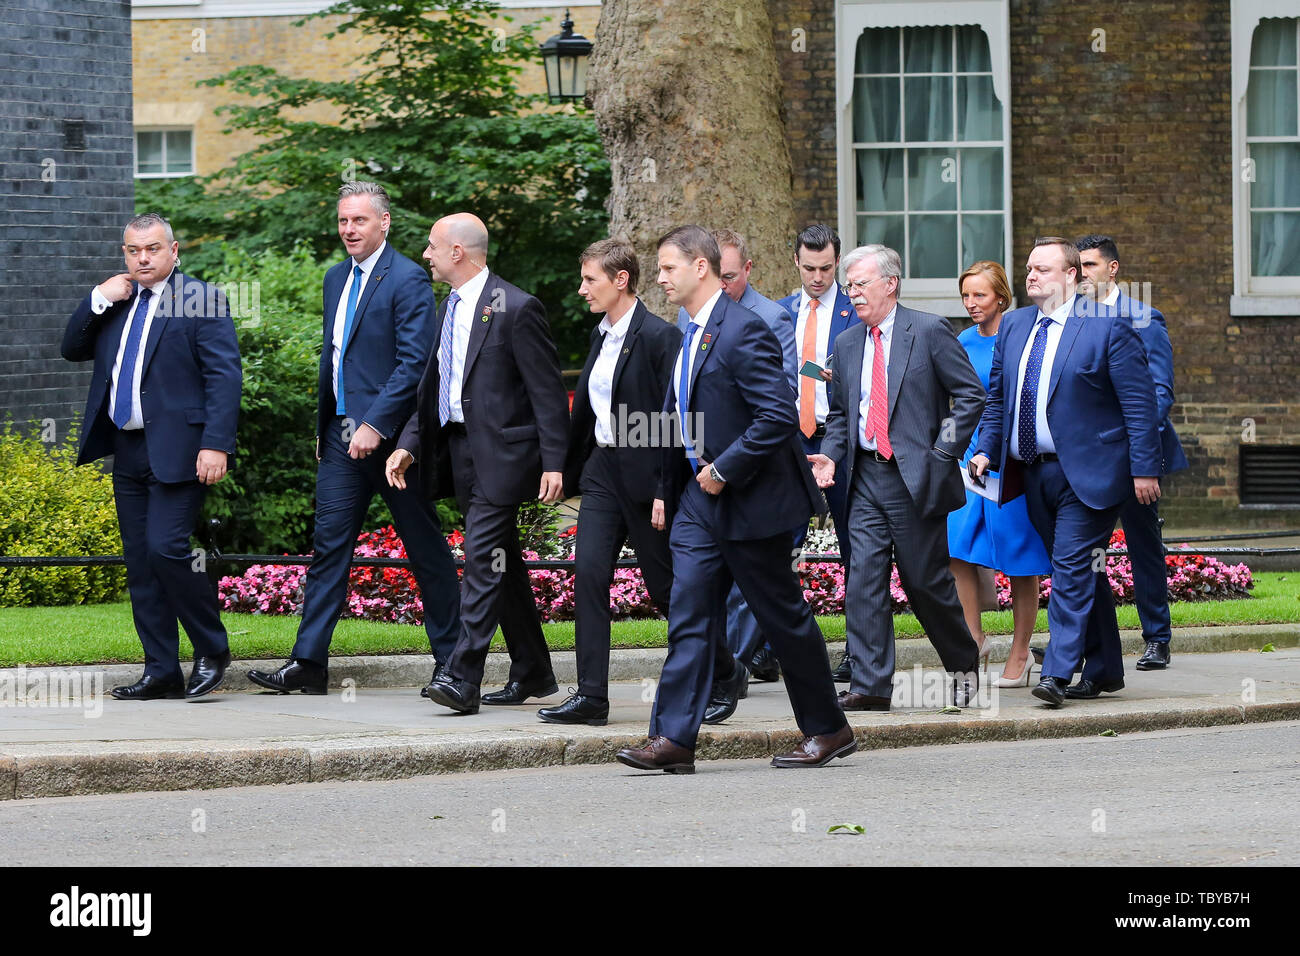 Downing Street, London, UK. 4th June, 2019. John Bolton National Security Advisor of the United States and the US President's entourage arrives in Downing Street as US President Donald Trump and First Lady Melania Trump continues their State Visit to the UK. Credit: Dinendra Haria/Alamy Live News Stock Photo